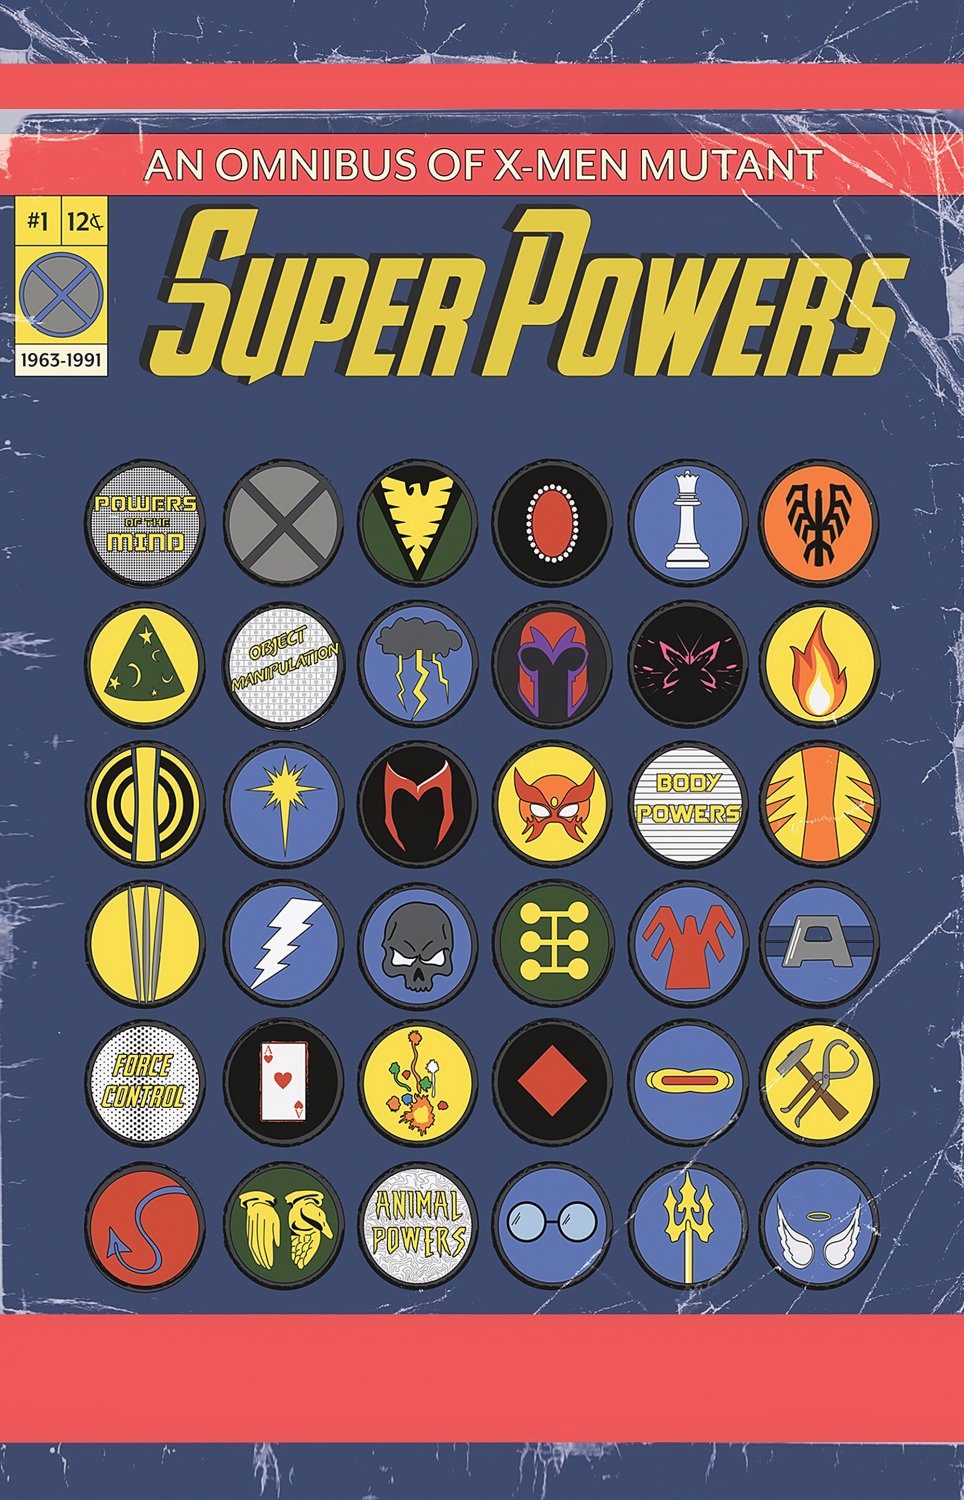 Omnibus of X-men Mutant SuperPowers Chart  13"x19" (32cm/49cm) Polyester Fabric Poster